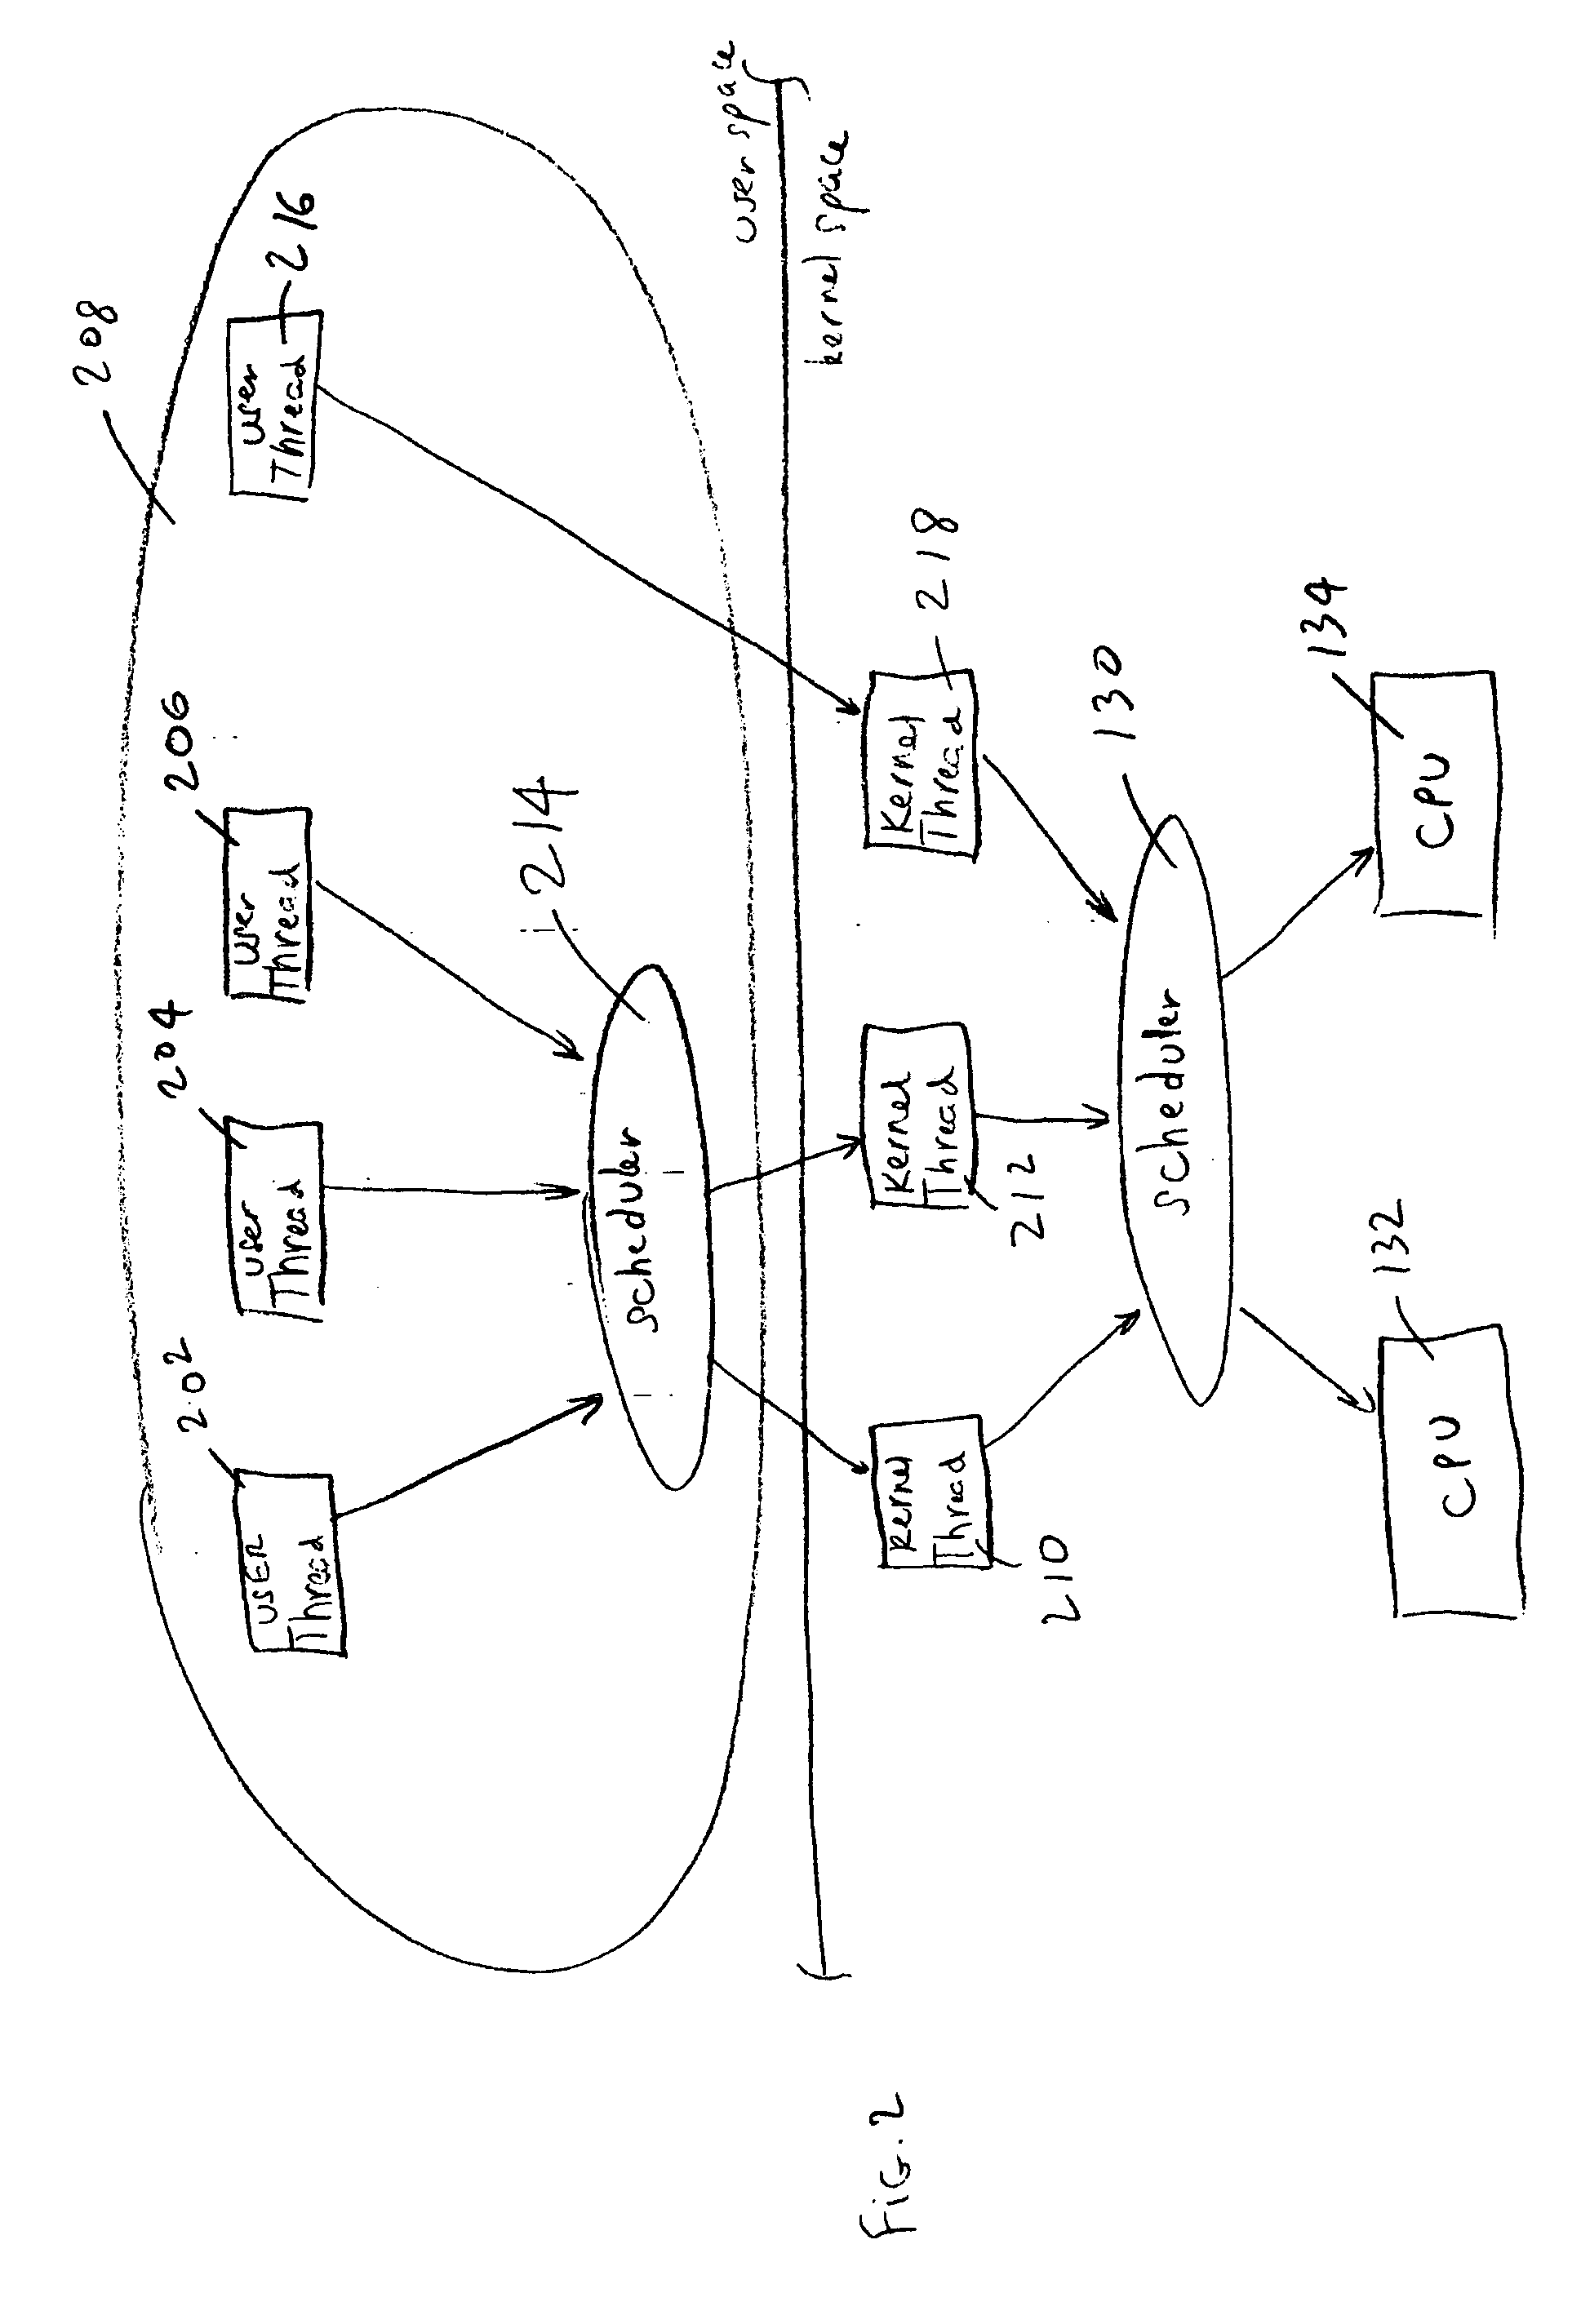 Arrangements and methods for invoking an upcall in a computer system